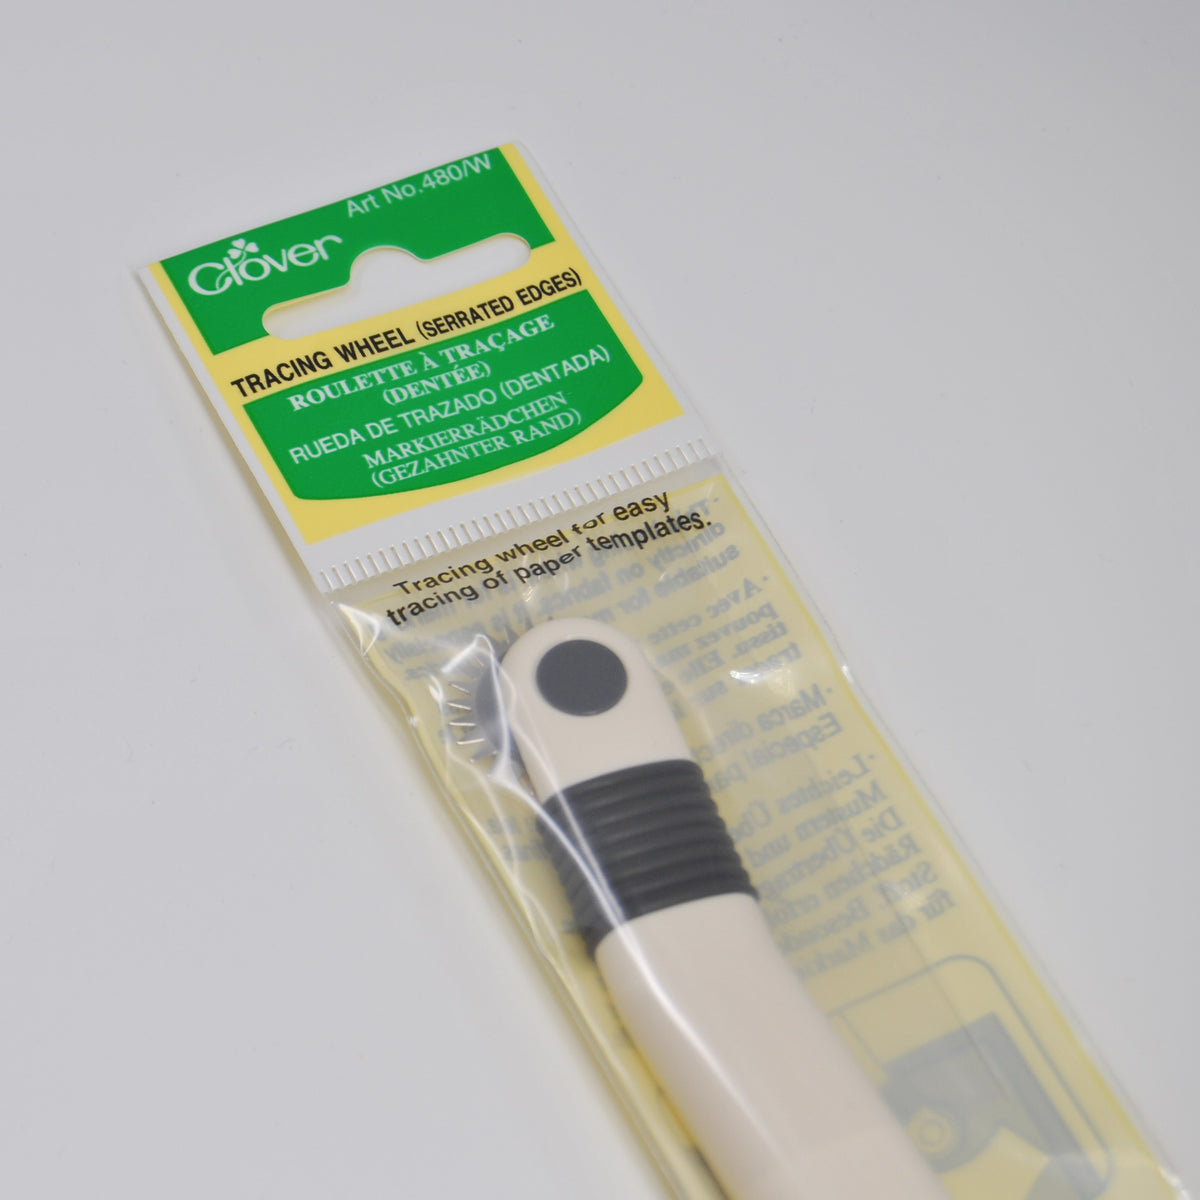 Clover Double Tracing Wheel - Serrated Edge